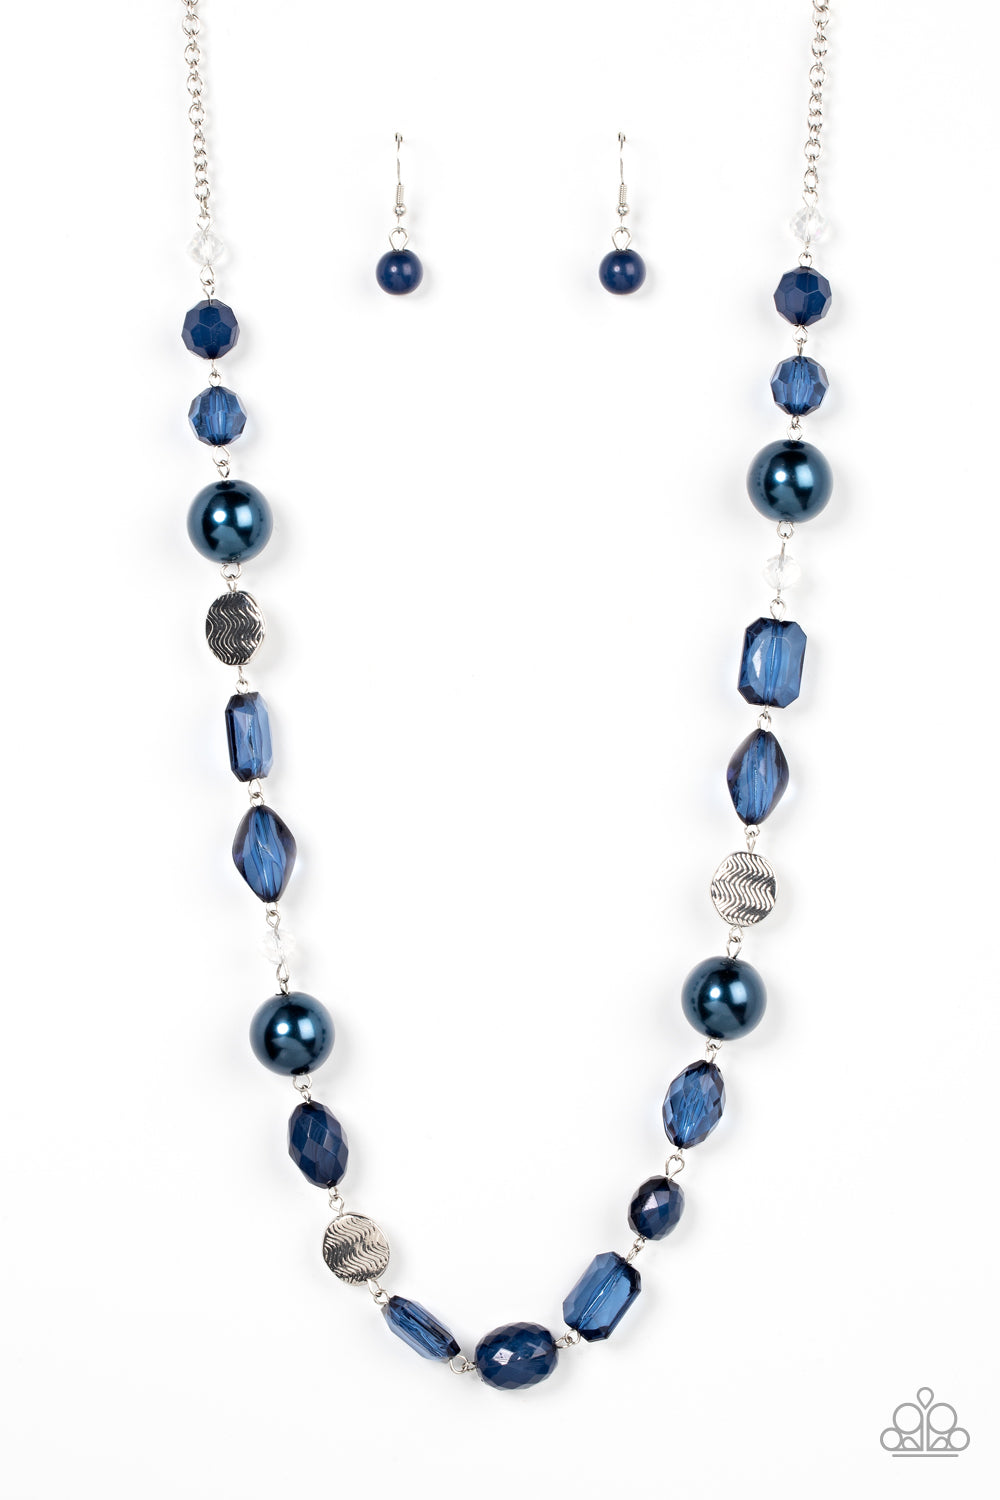 Timelessly Tailored - Blue Pearls, Rhodonite Crystal-Like Beads, Silver Disc Paparazzi Necklace & matching earrings